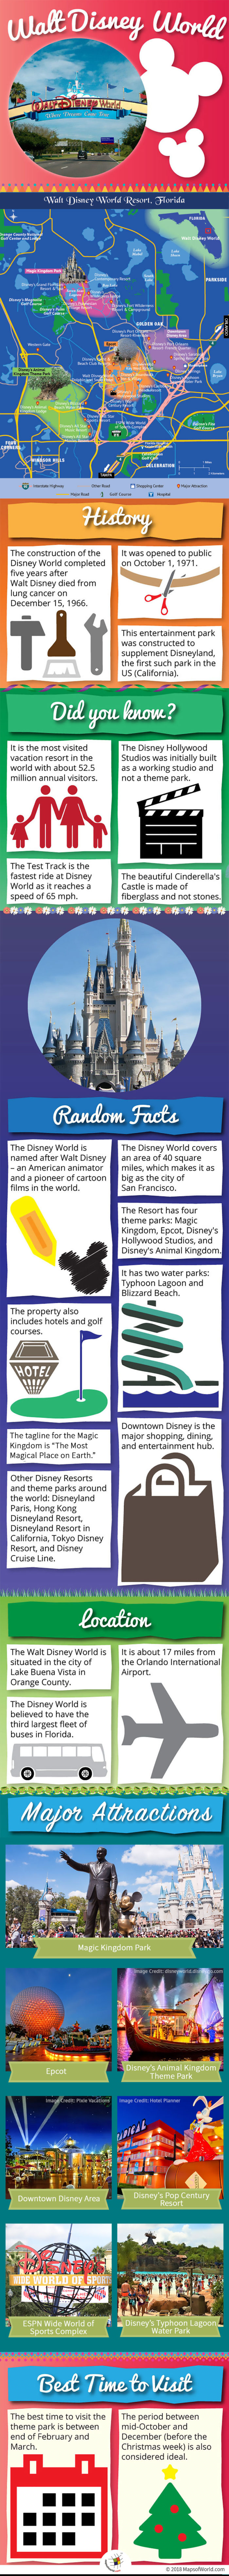 Infographic Depicting Walt Disney World Fast Facts